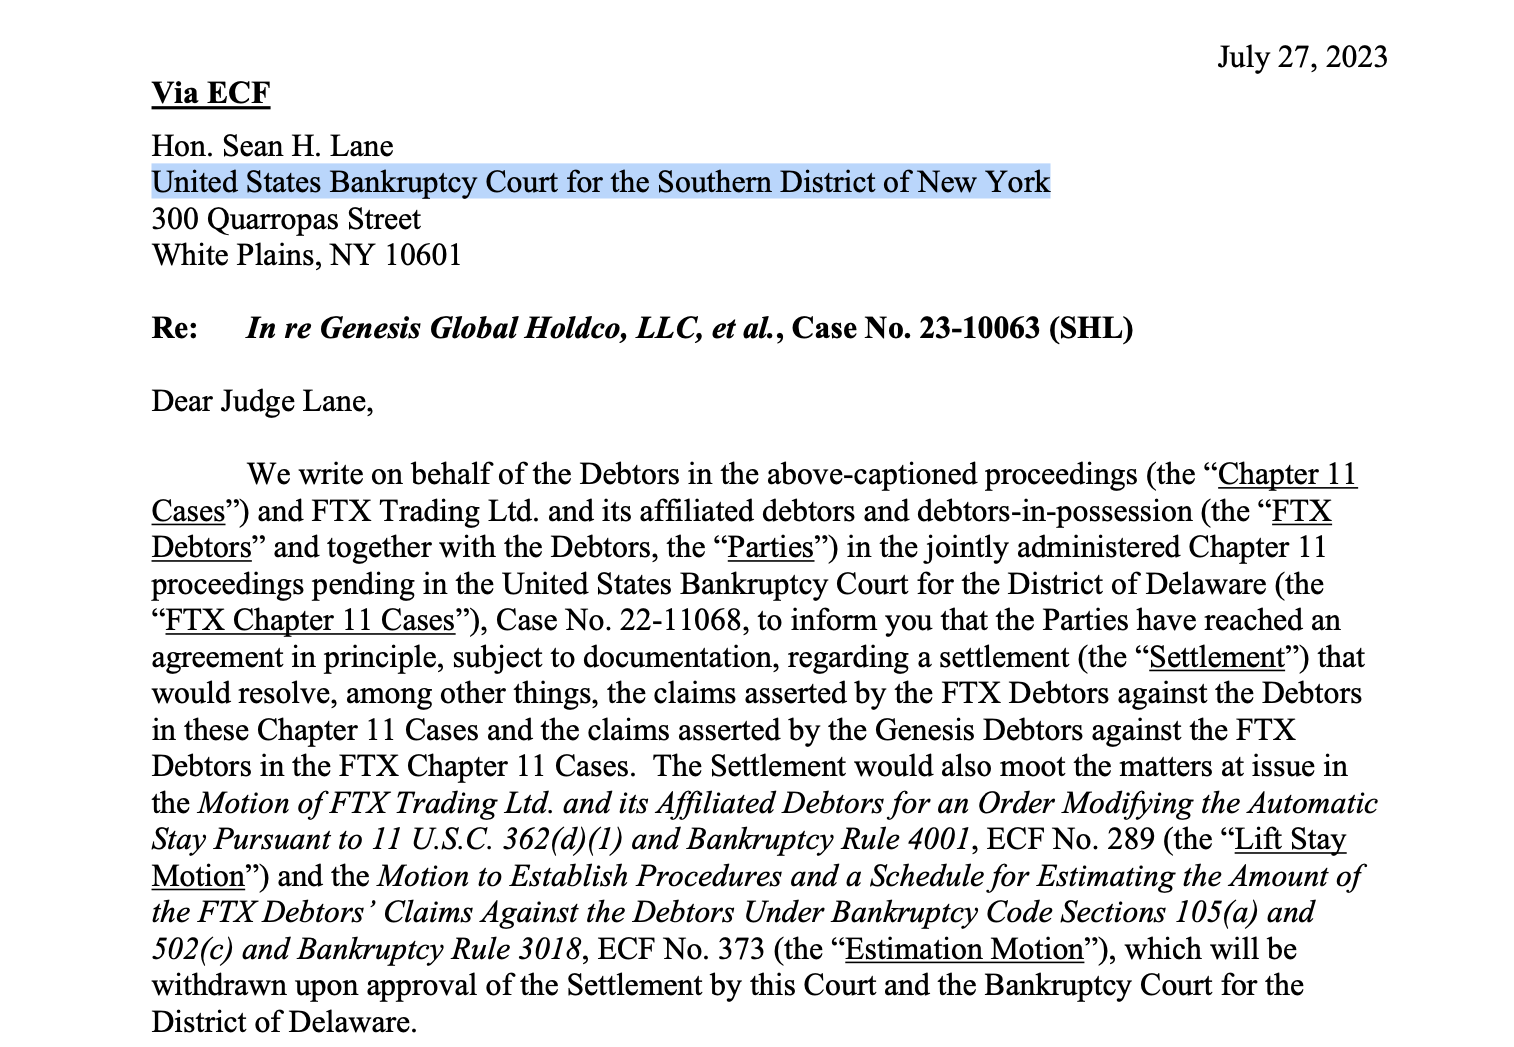 Screen capture of FTX and Genesis in-principle agreement addressed to Judge Sean H. Lane.